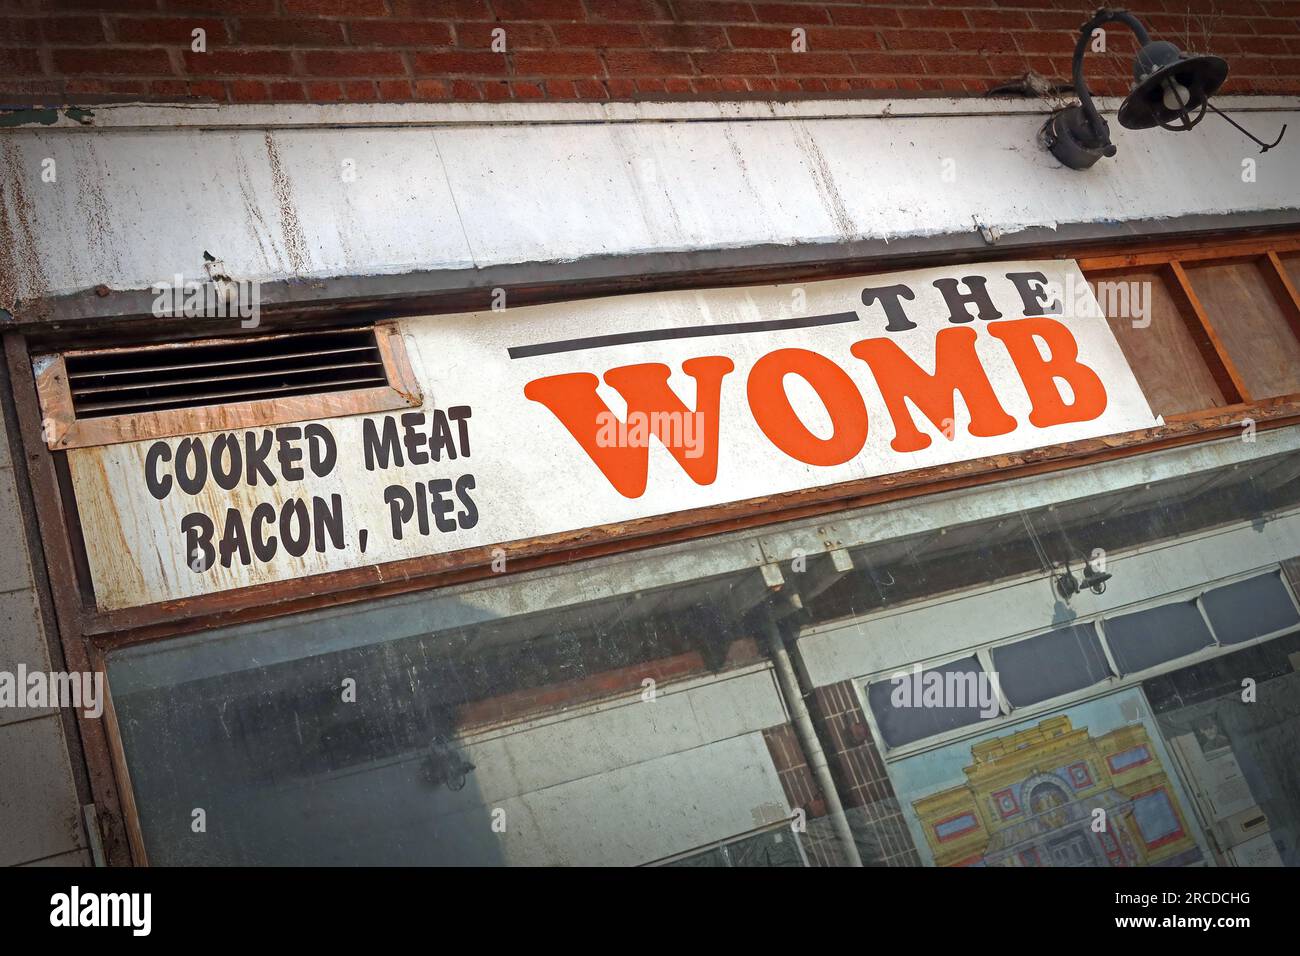 The Womb - Cooked Meat, Bacon, Pies, Weaver Square Shopping Centre, 2 Market St, Northwich, Cheshire, Angleterre, ROYAUME-UNI, CW9 5AY Banque D'Images